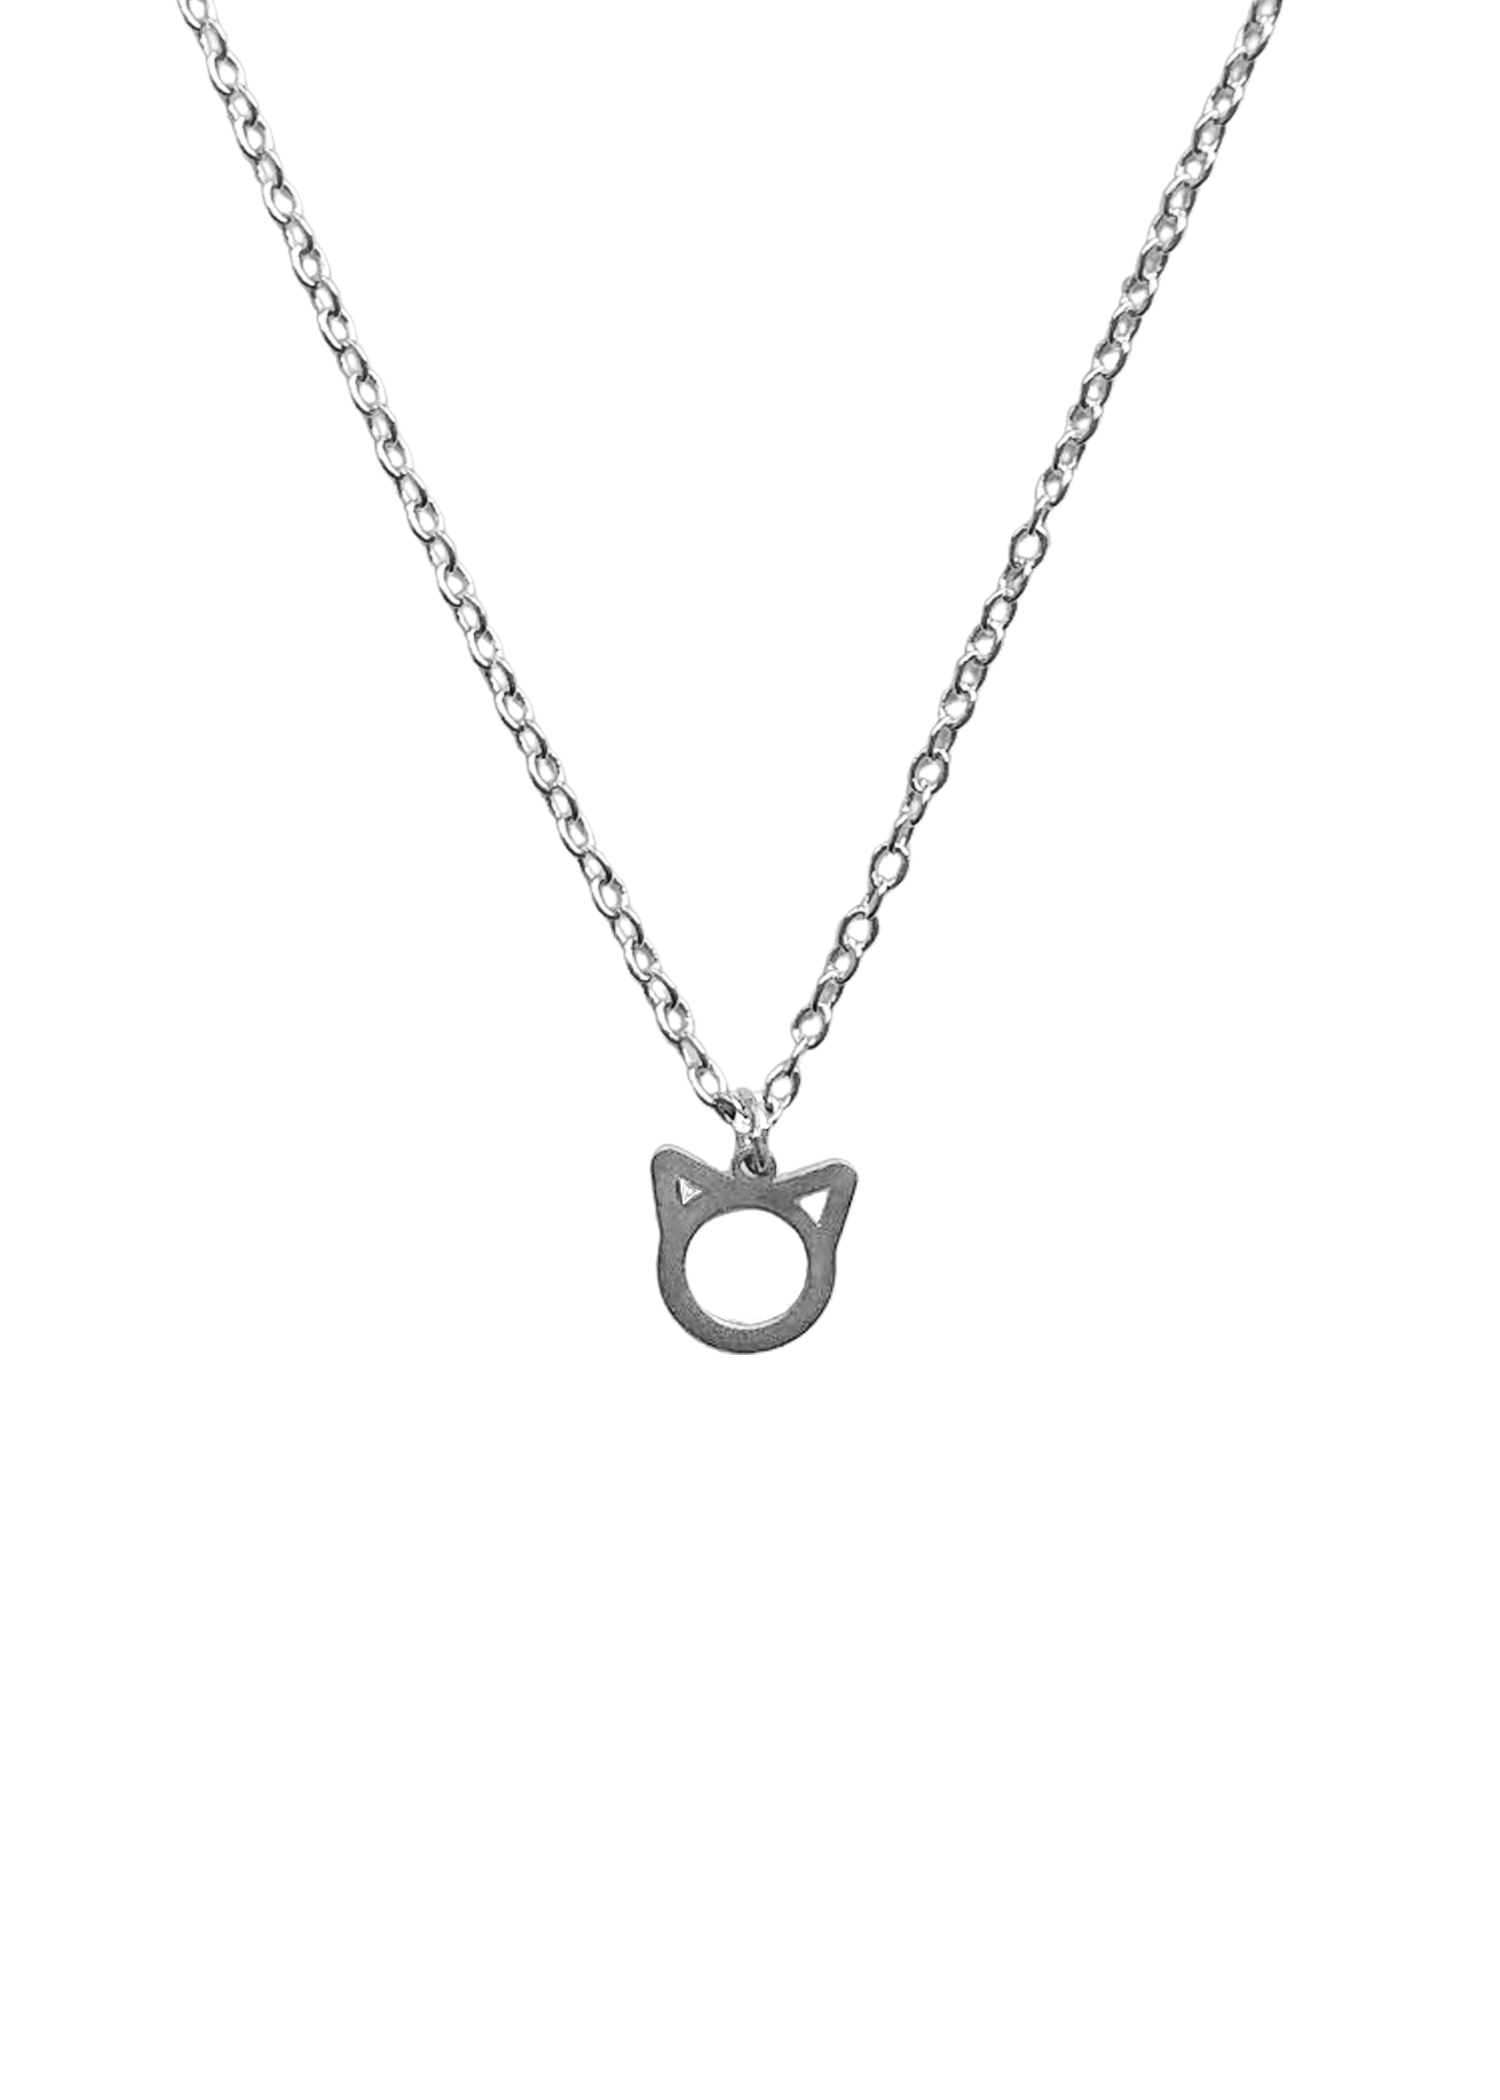 Kitten Charm Necklace - .925 Sterling Silver